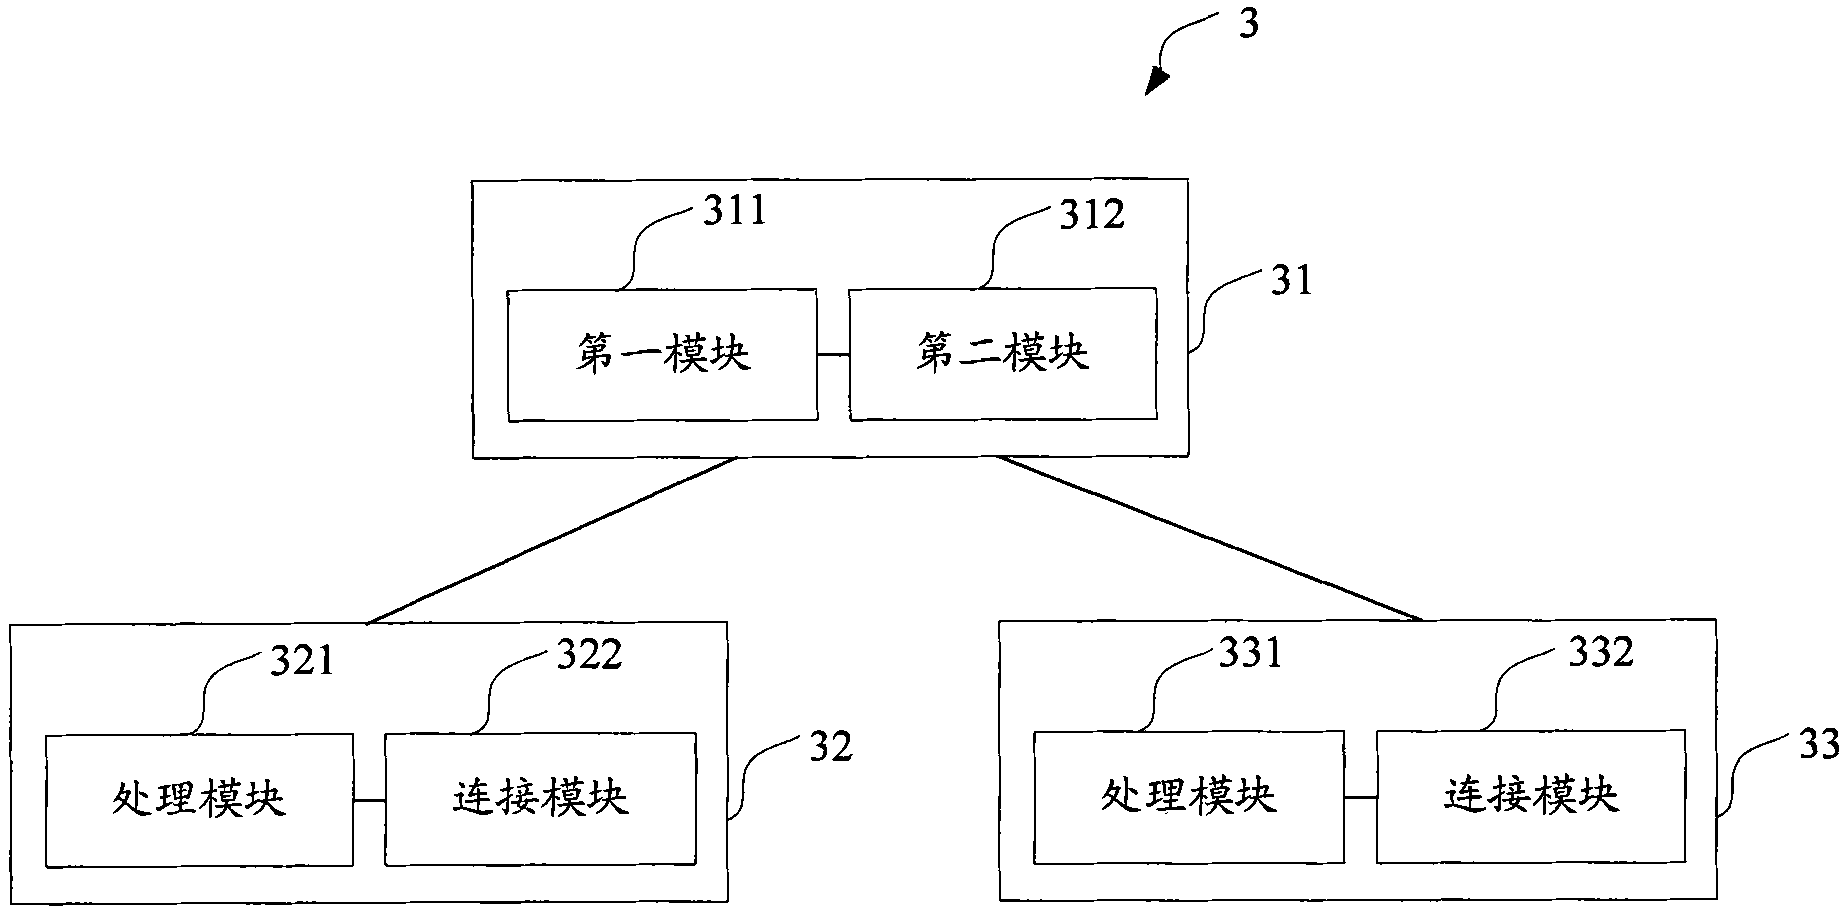 Method and system for establishing data connection